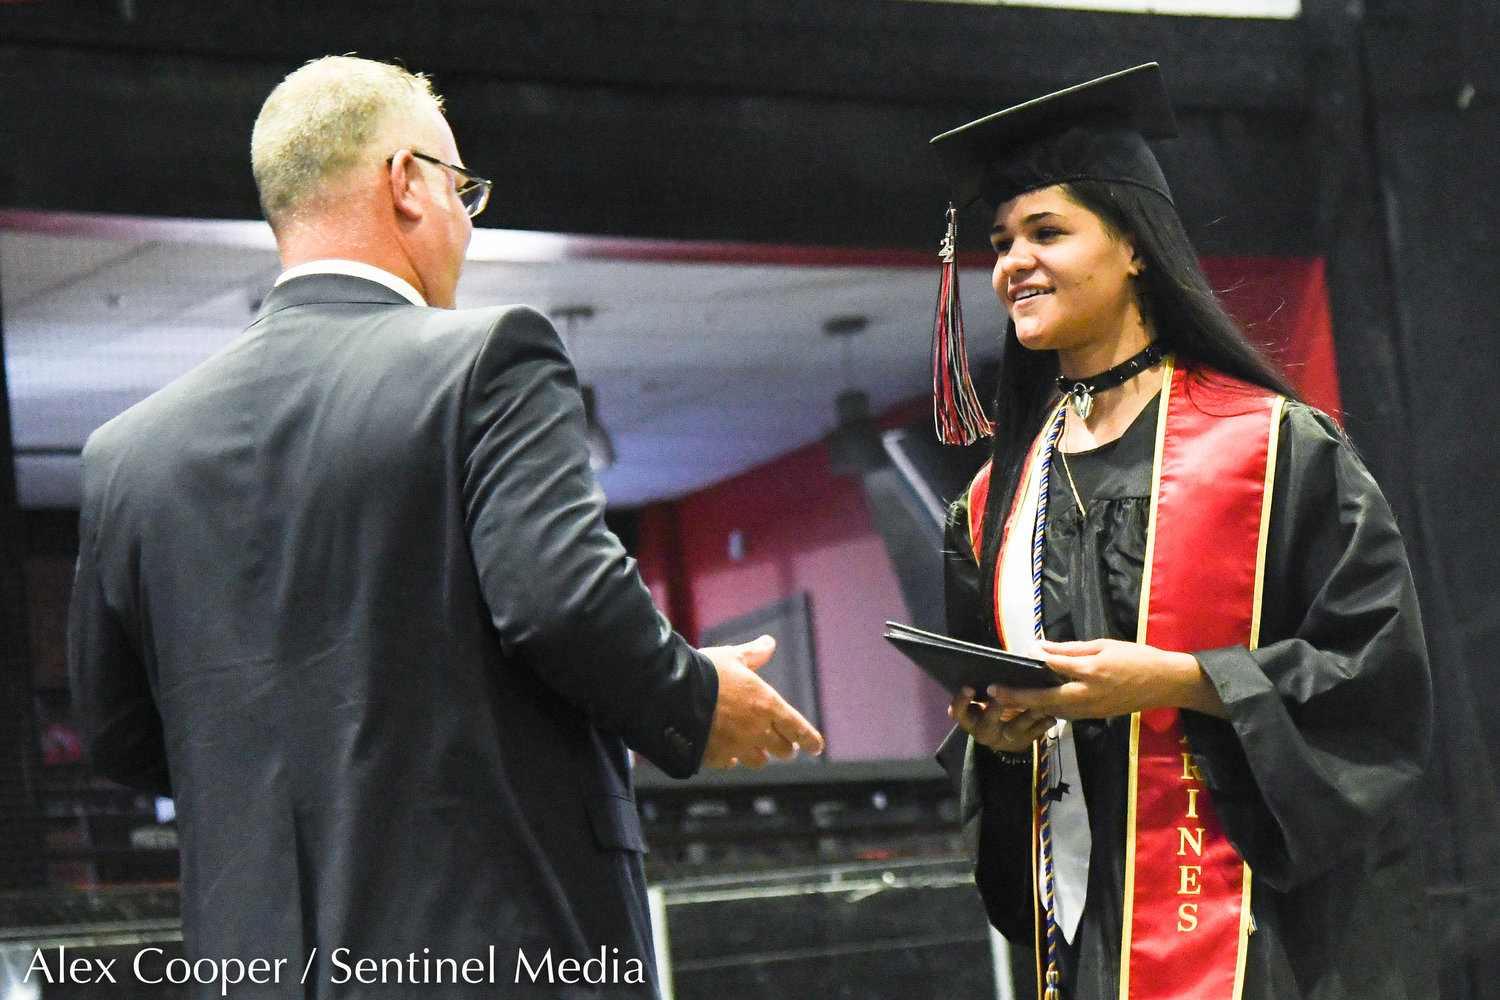 The annual commencement ceremony for Thomas R. Proctor High School graduates took place on Friday at the Adirondack Bank Center at the Utica Memorial Auditorium.